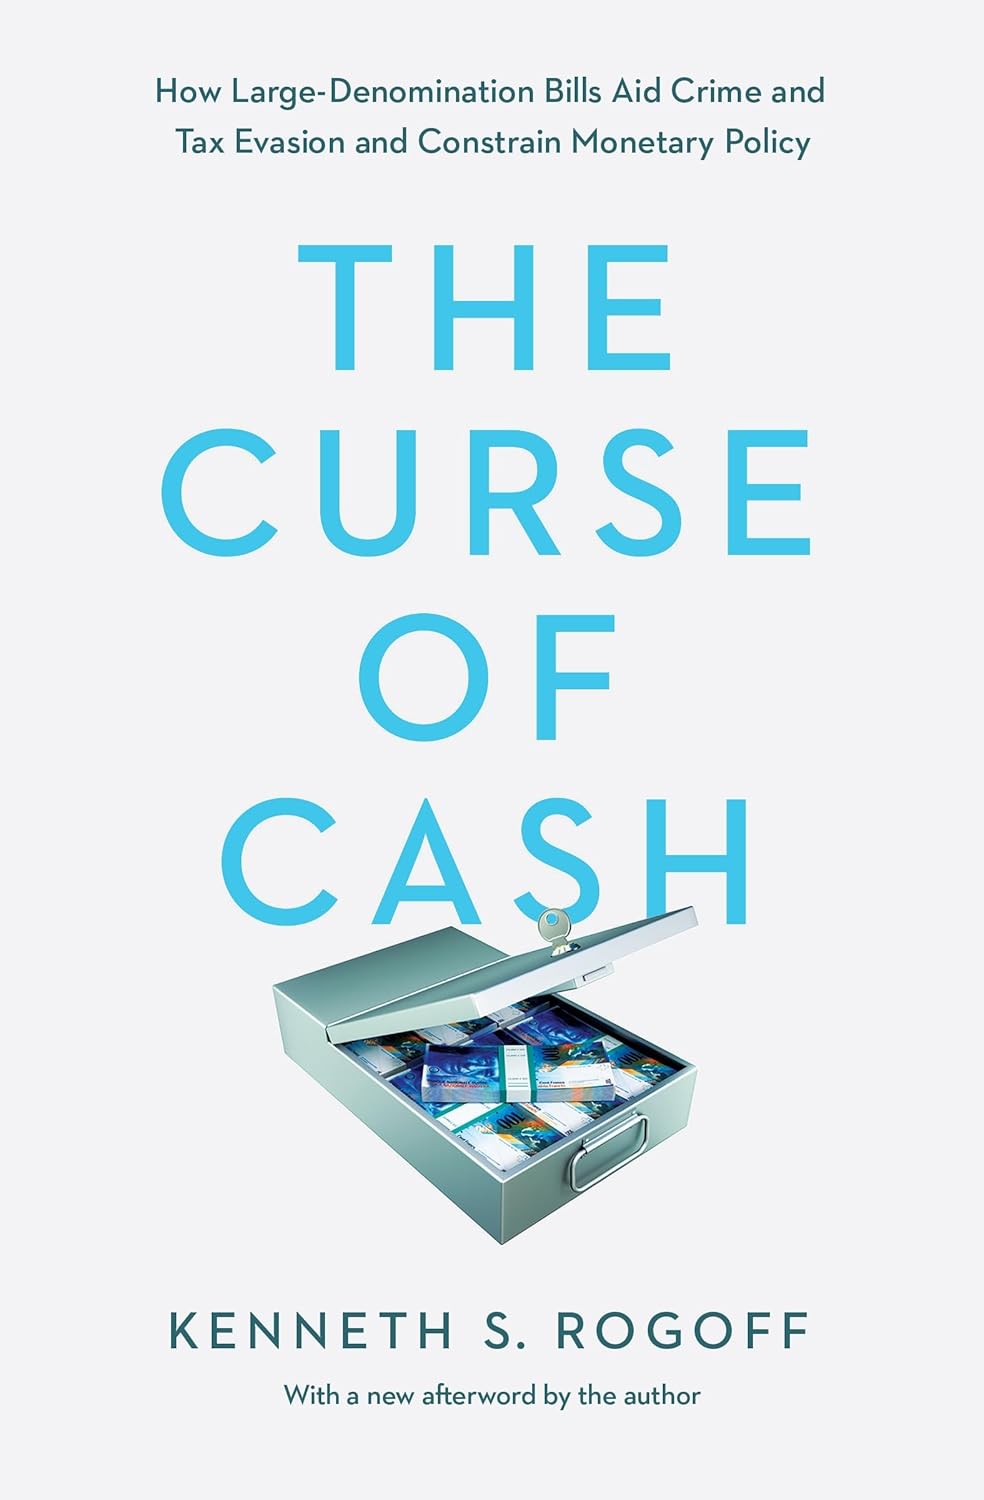 Book cover: "The Curse of Cash."